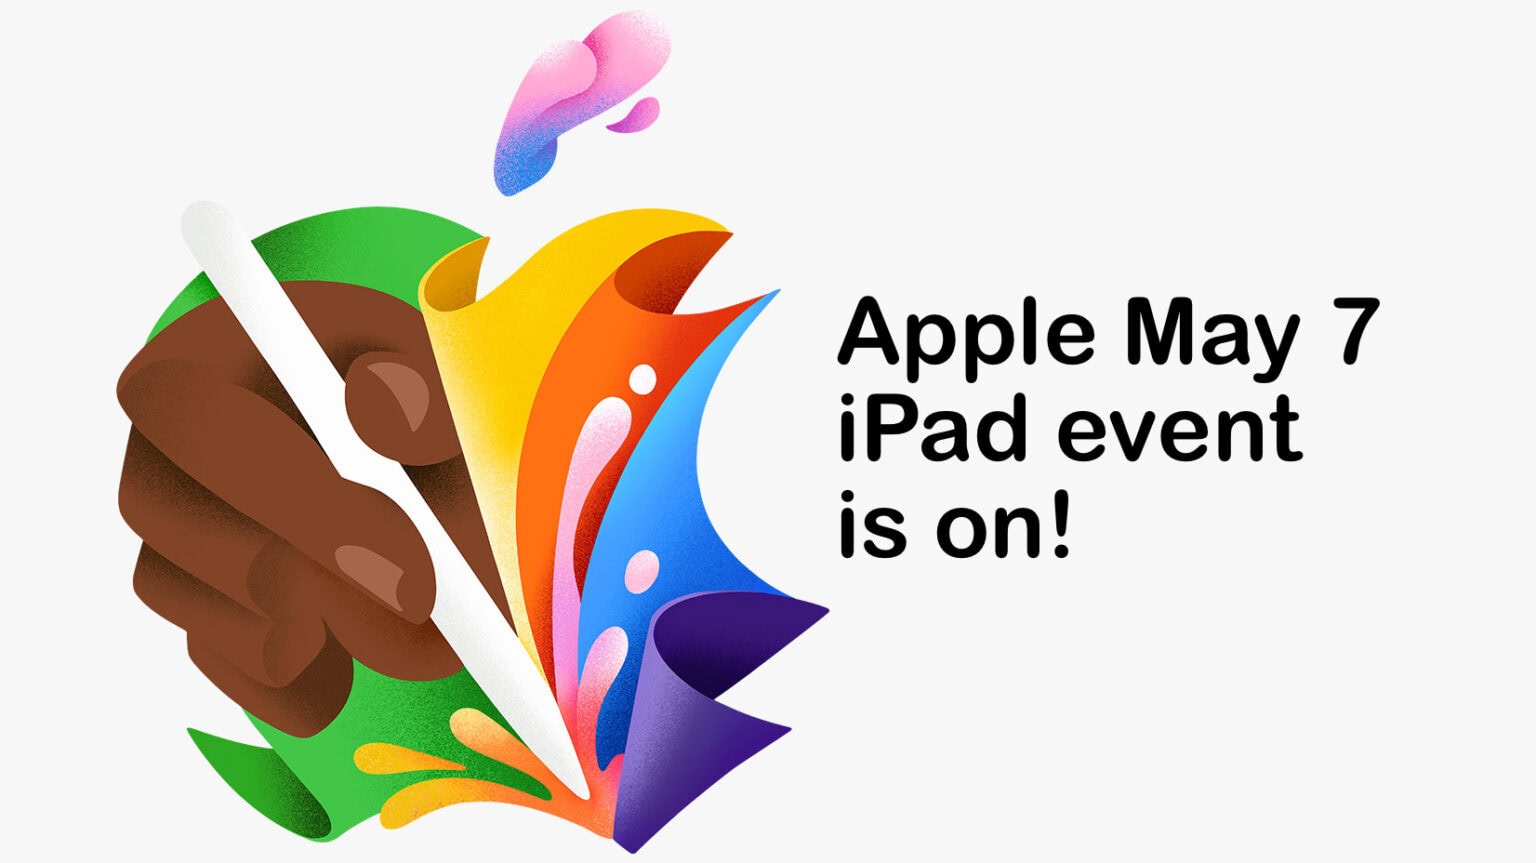 Apple sets May 7 event to launch new iPad Pro and iPad Air